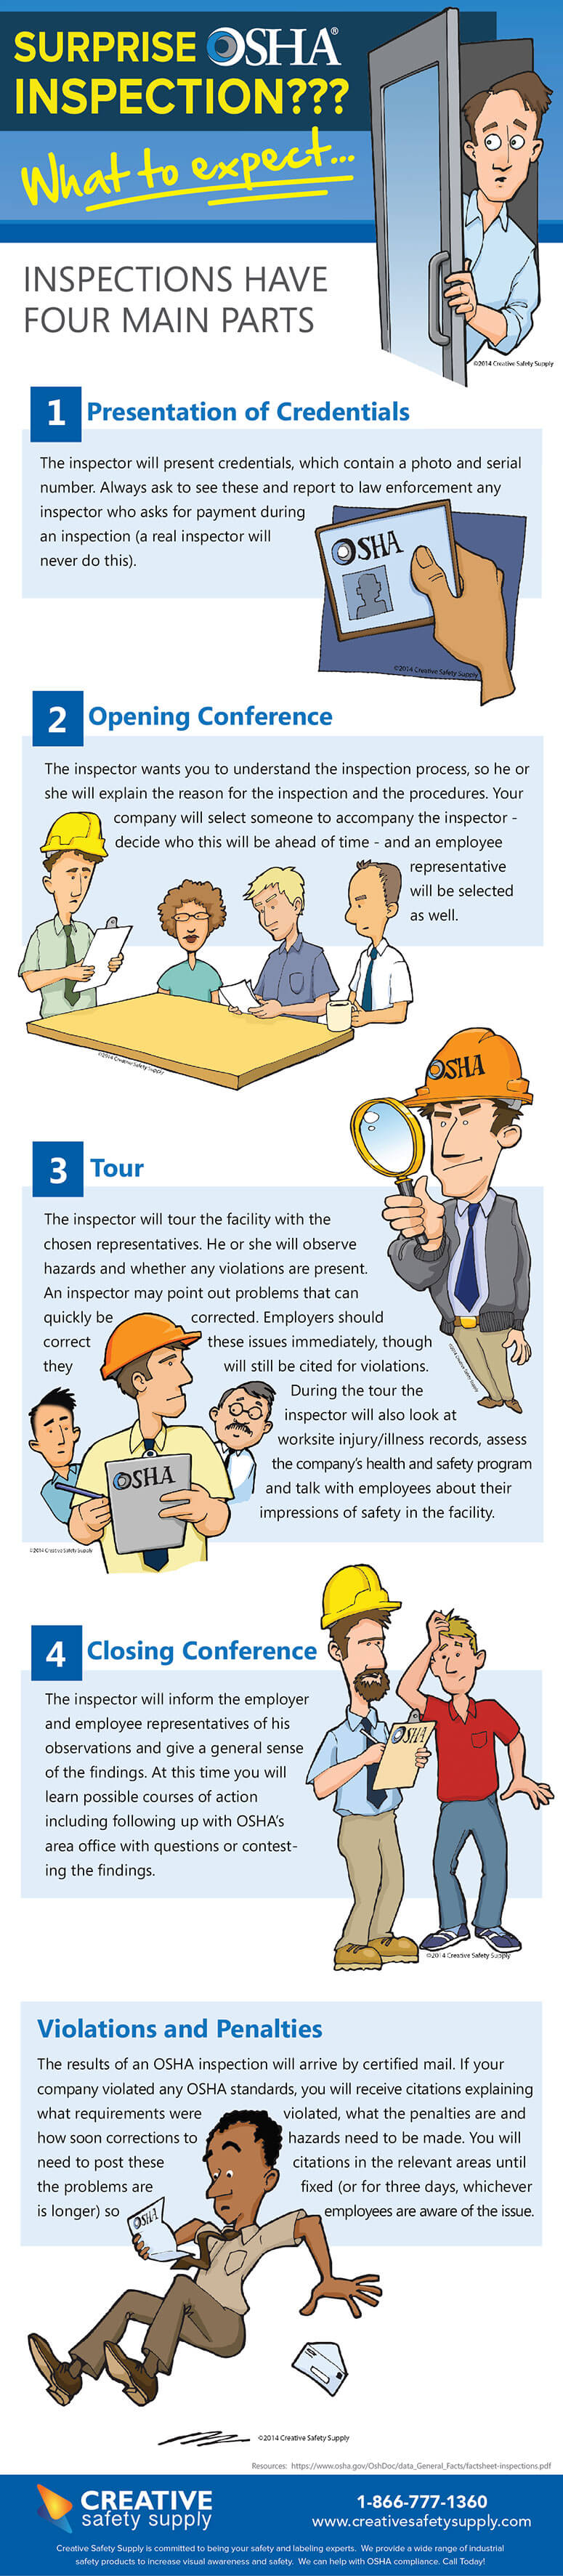 Surprise OSHA Inspection? What to Expect